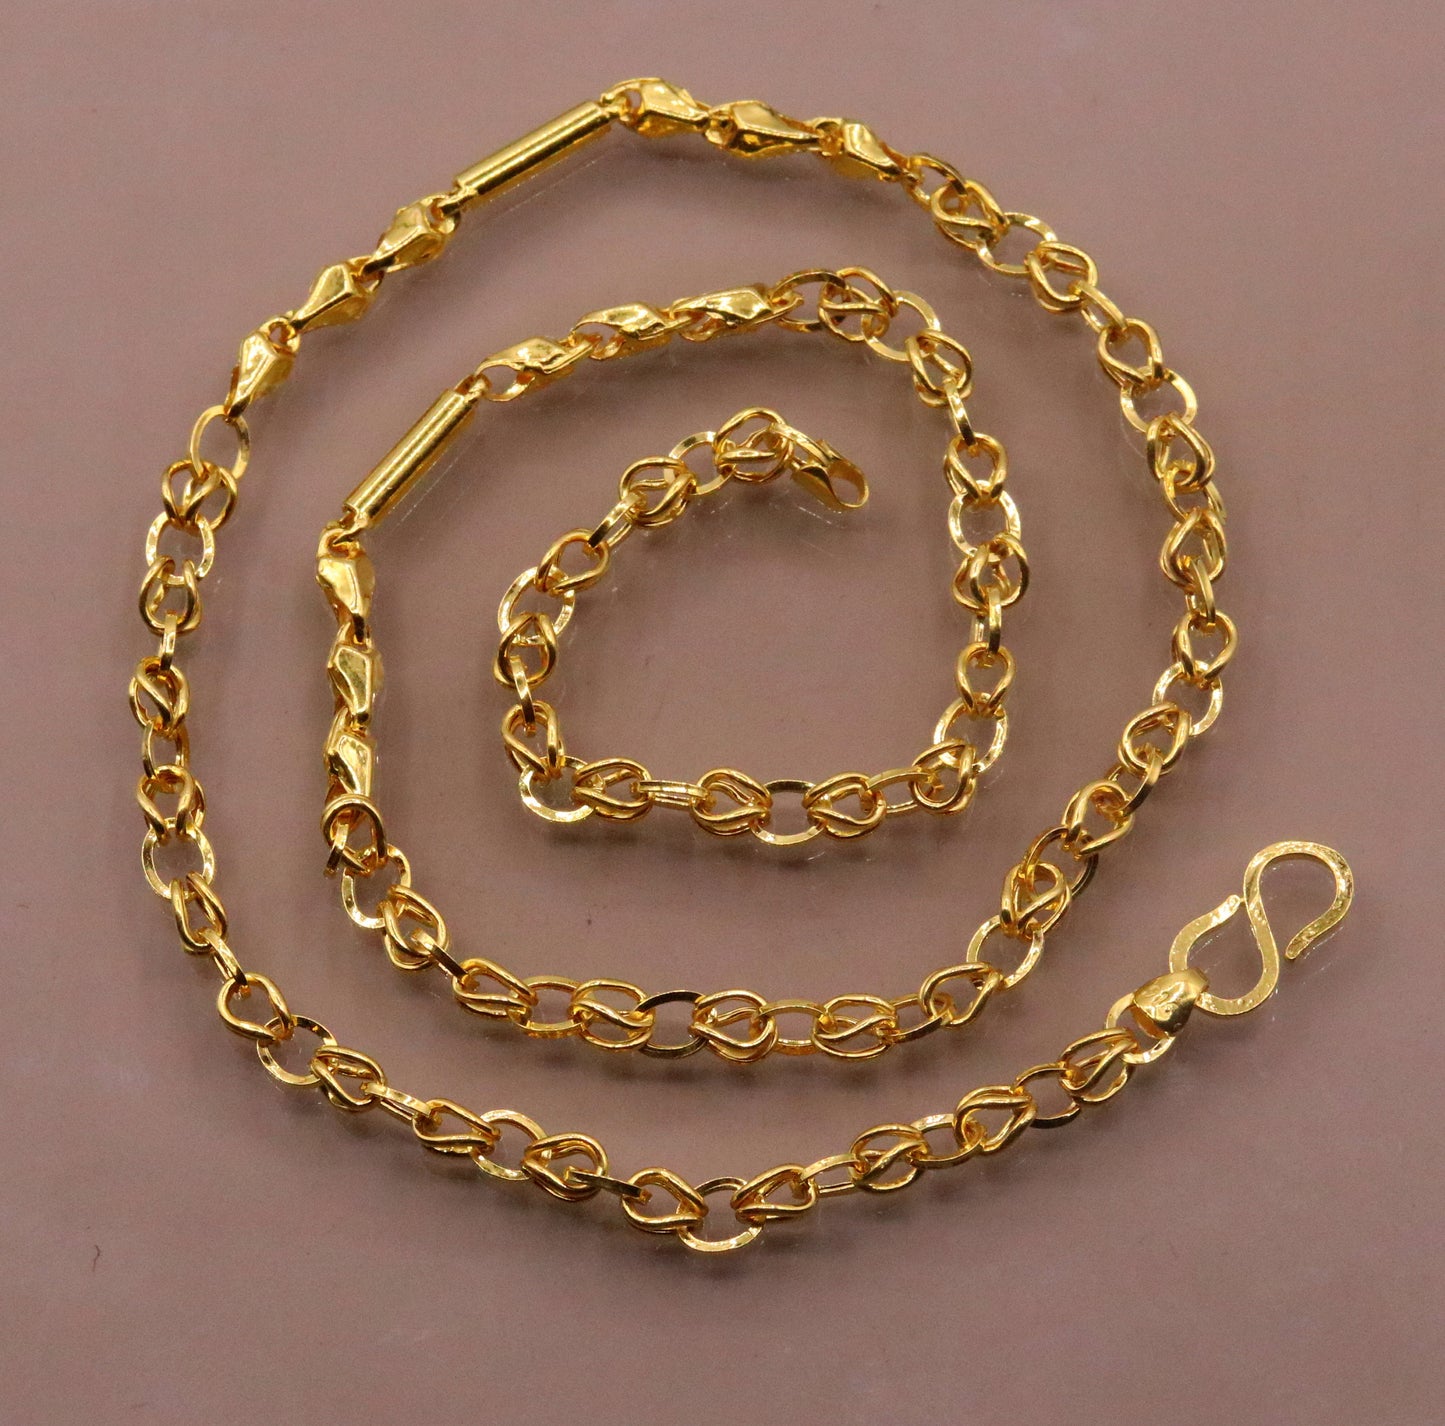 Vintage design handmade 22kt yellow gold fabulous link chain unisex gifting necklace chain with amazing design  ch187 - TRIBAL ORNAMENTS